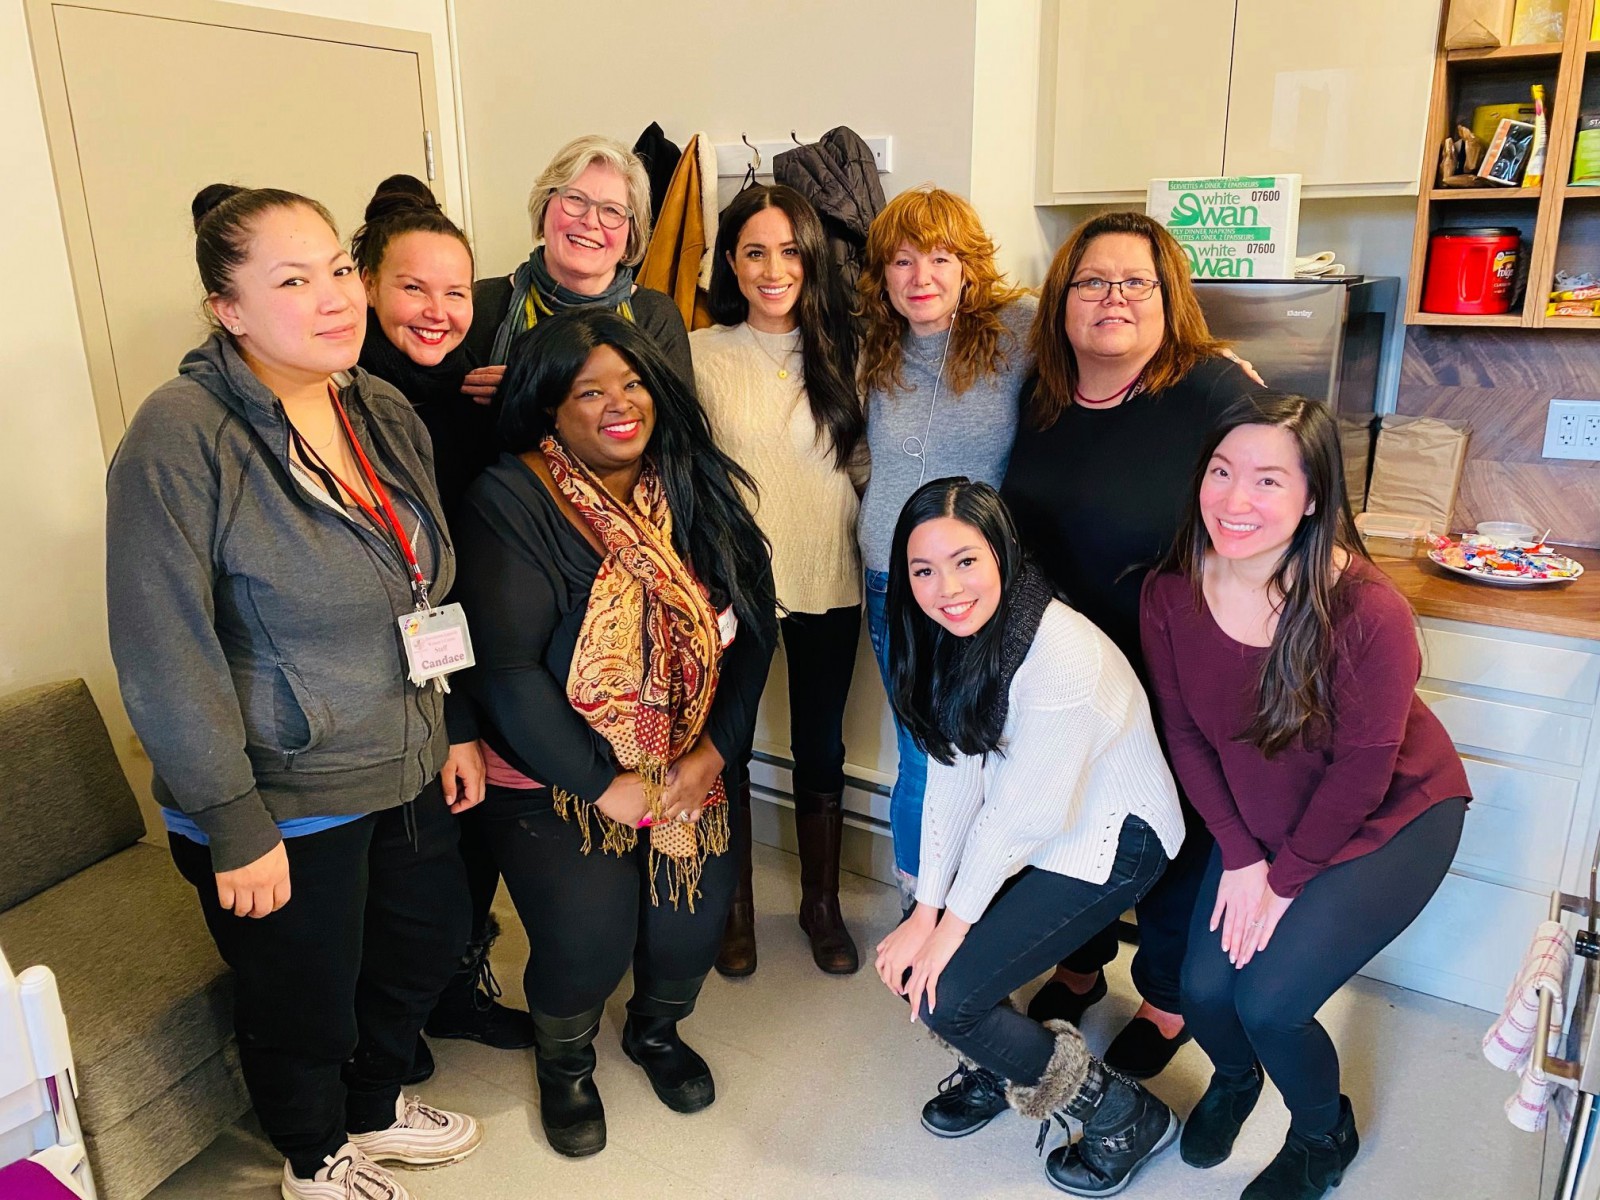 The Duchess of Sussex was spotted for the first time yesterday, visiting a women's crisis centre in Canada